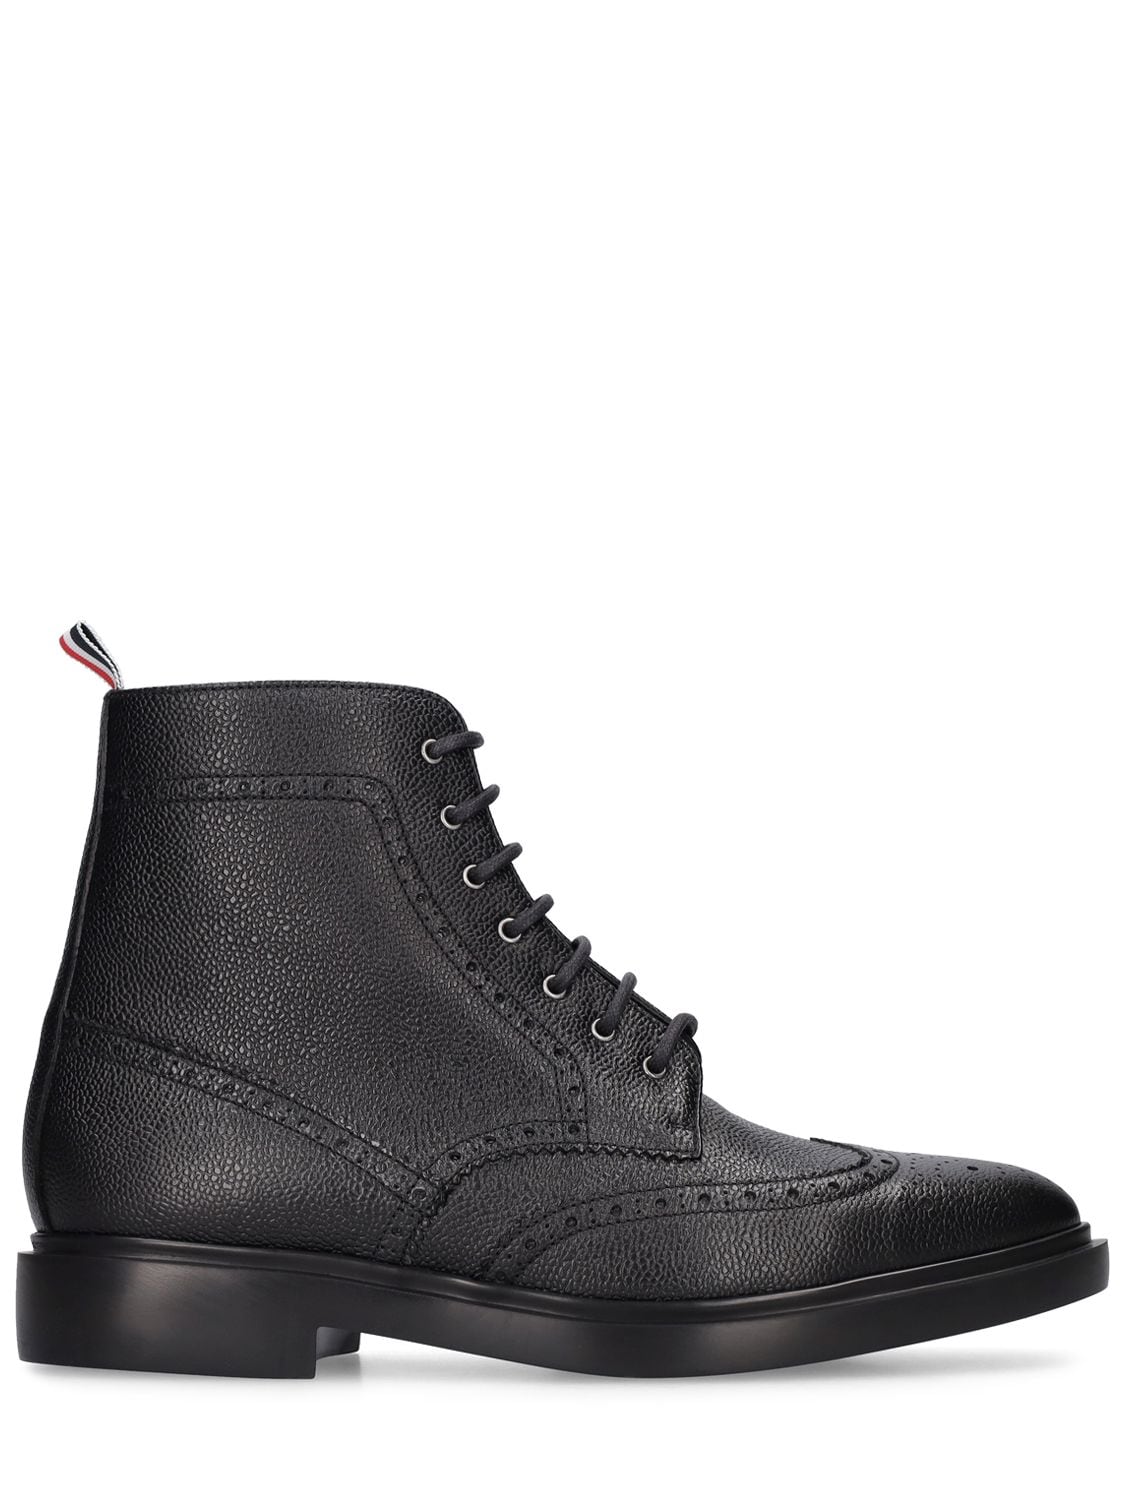 THOM BROWNE PEBBLED LEATHER WING TIP BOOTS